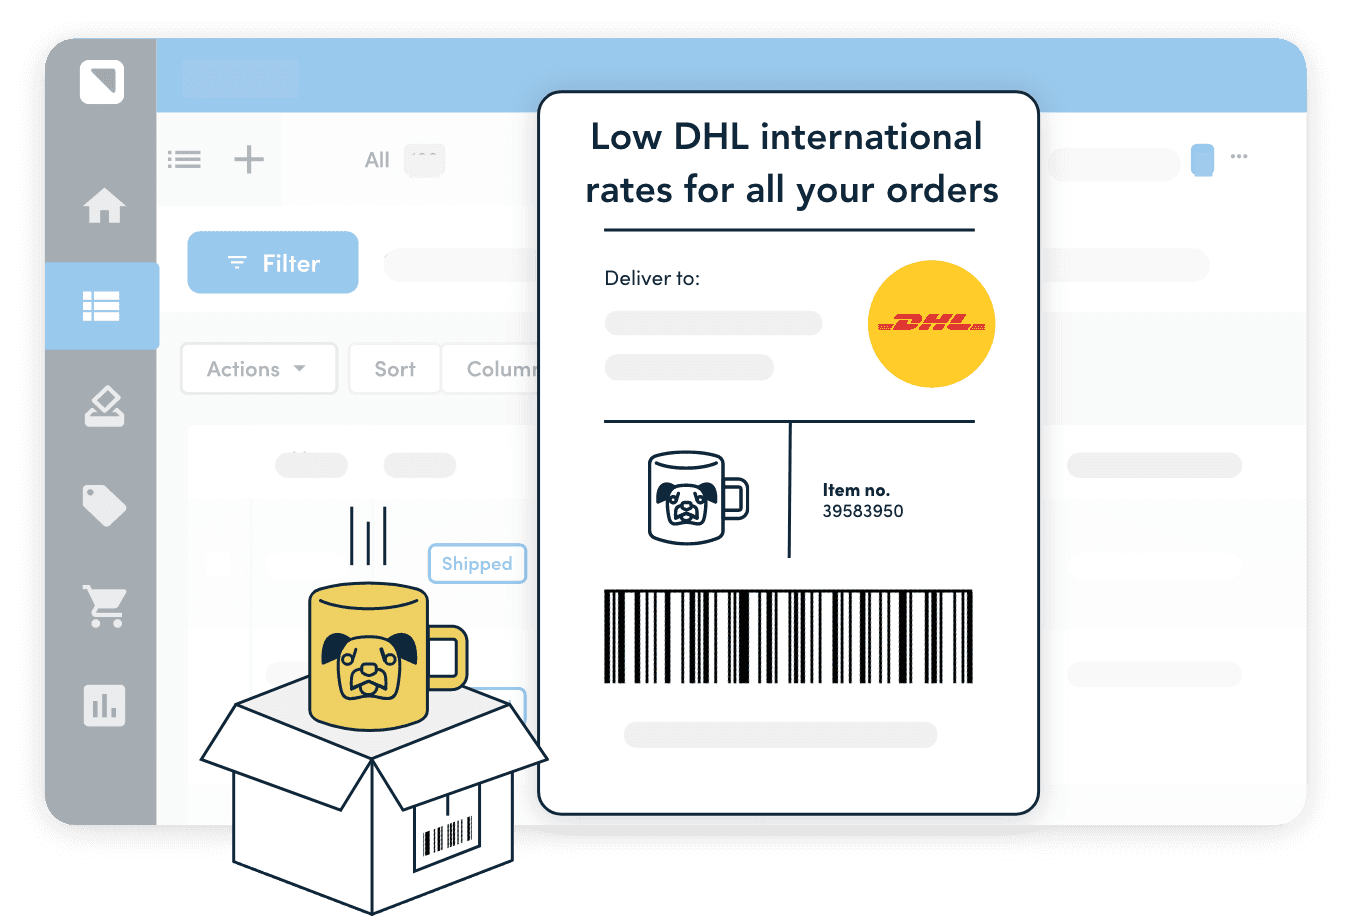  Immediate access to discounted DHL rates for international shipments 